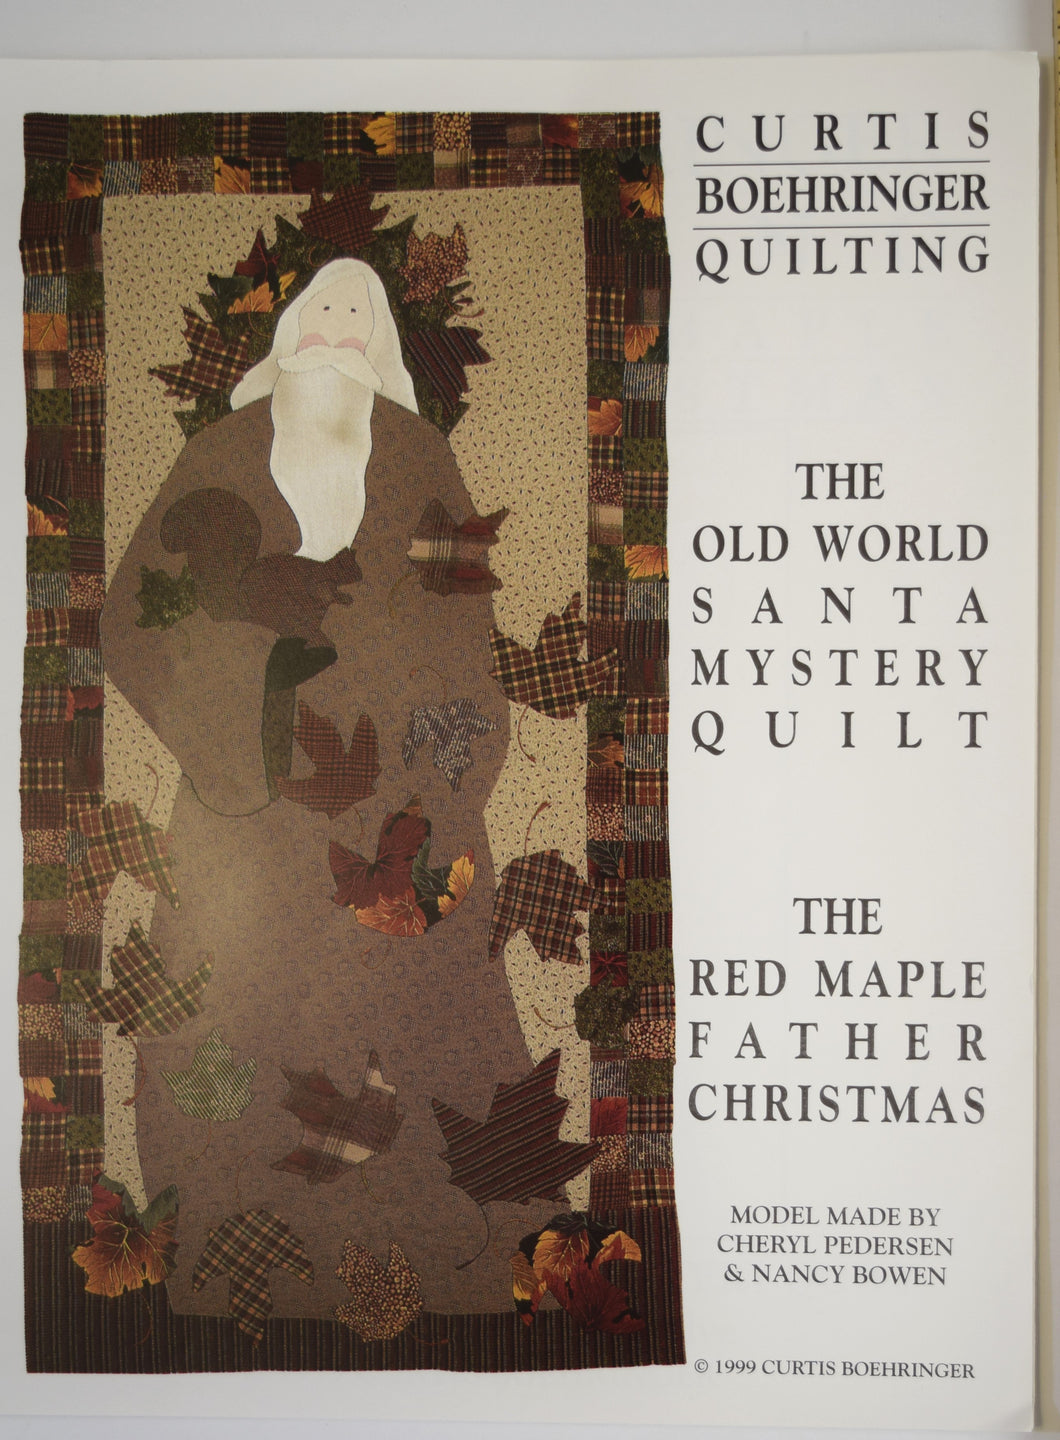 The Red Maple Father Christmas